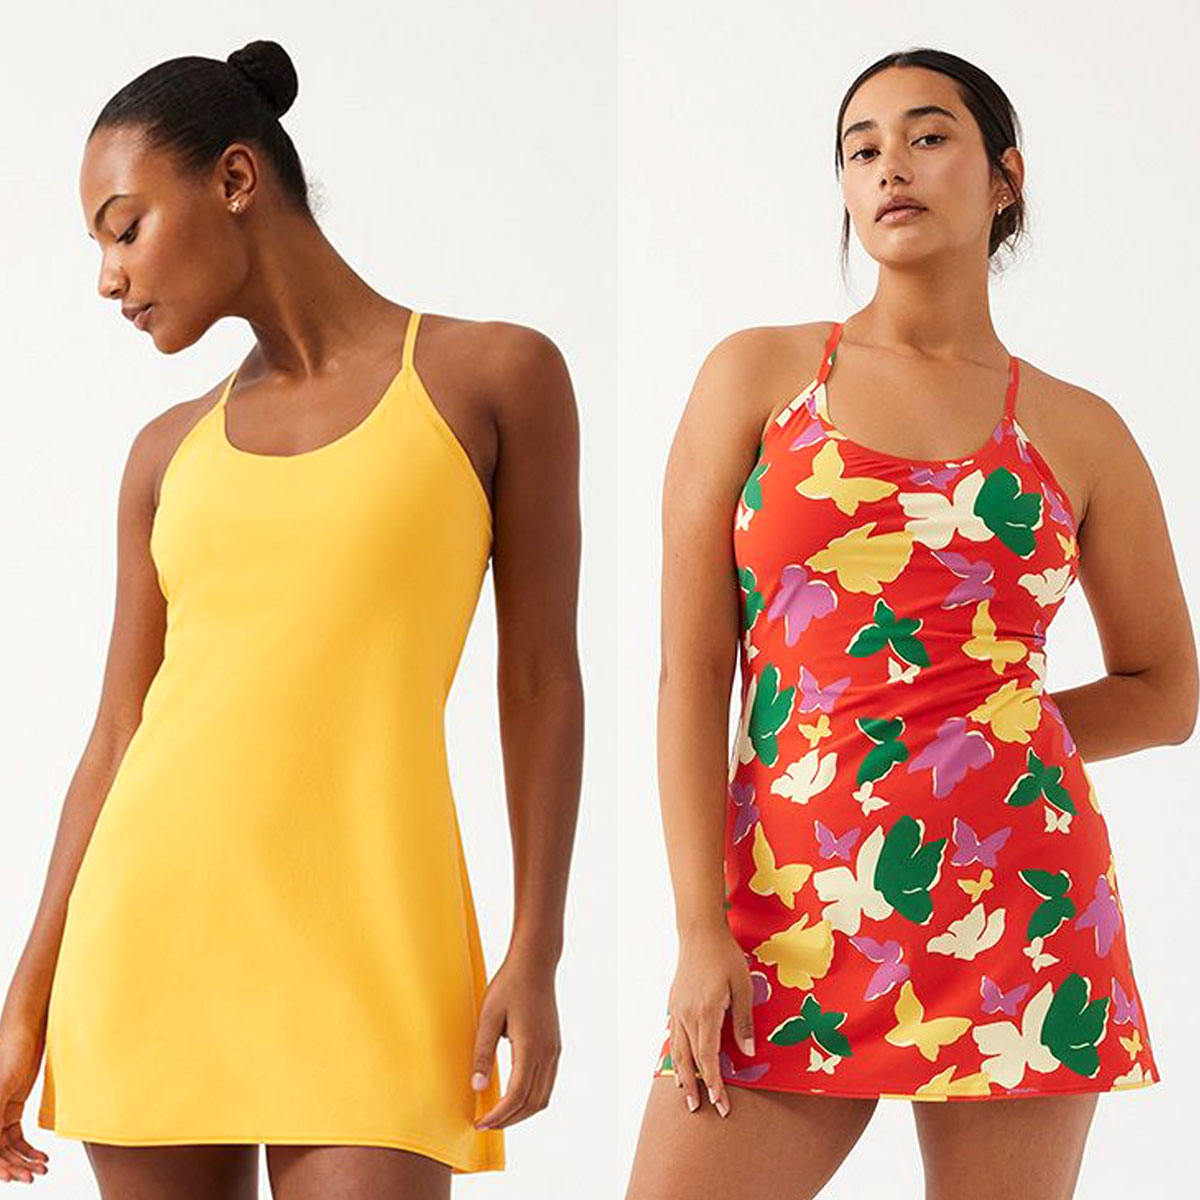 Workout Dresses: Outdoor Voices v. Abercrombie